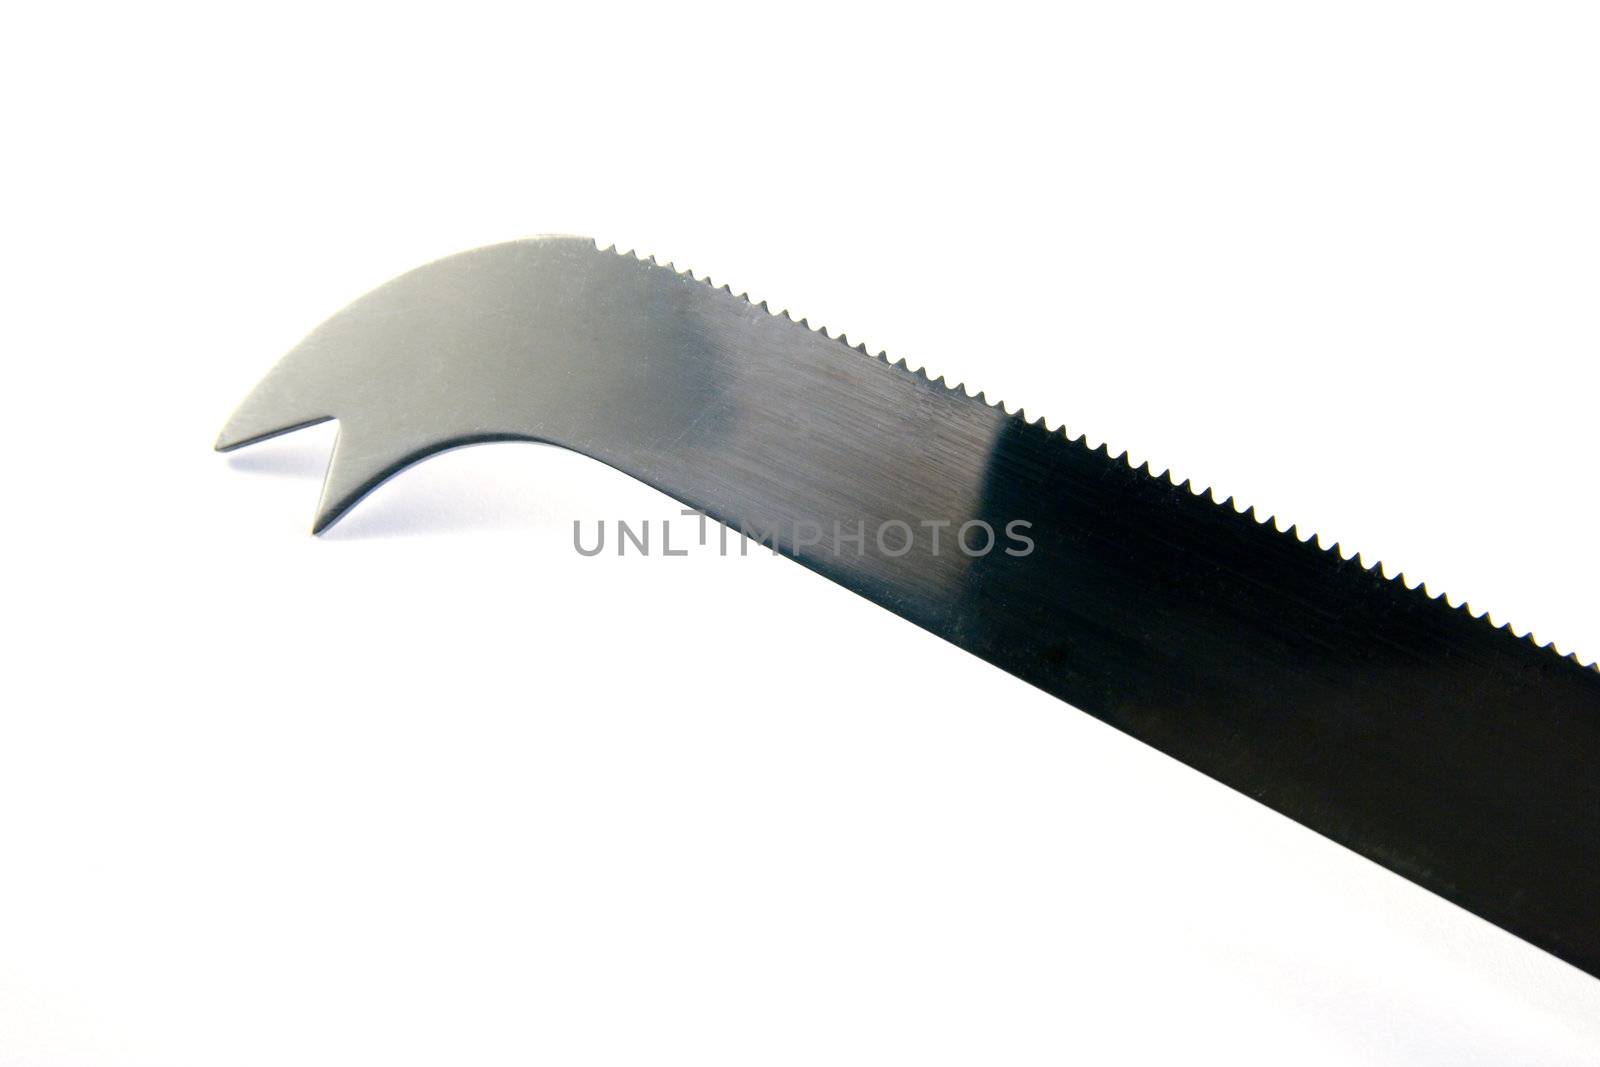 Chrome cheese knife with serrated edge on a white background